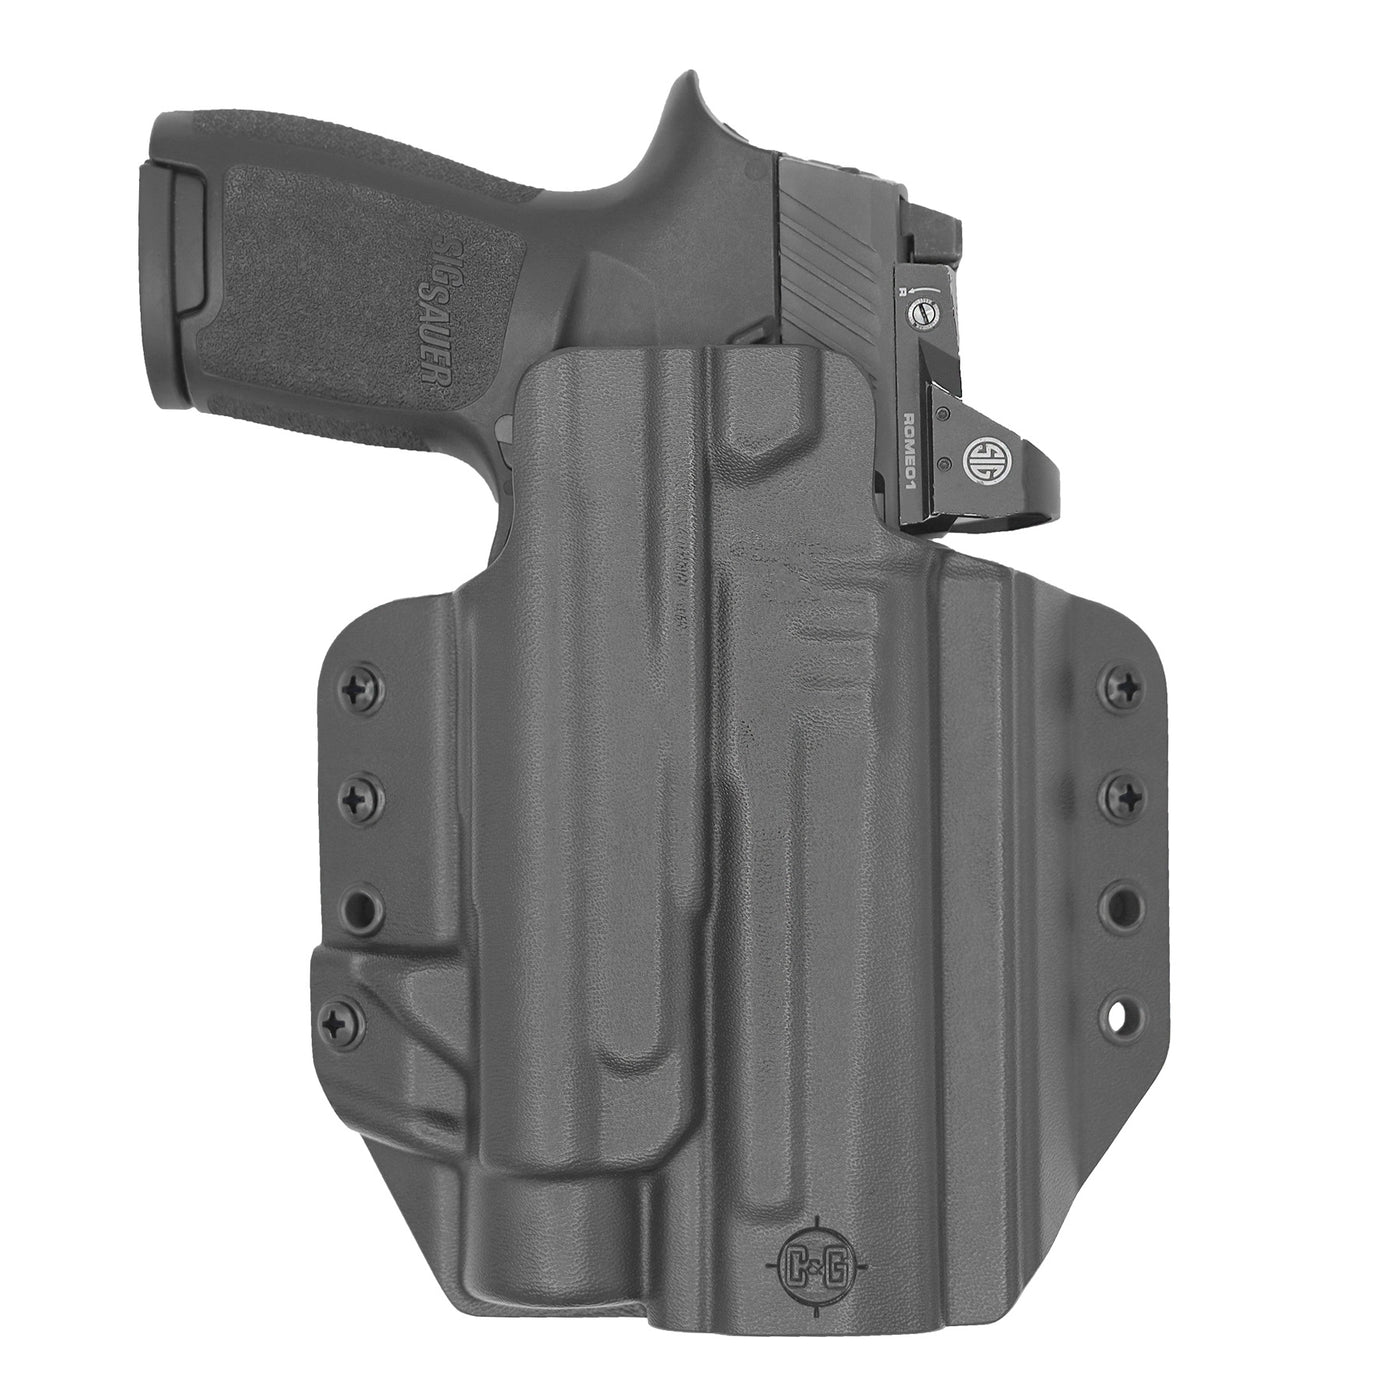 C&G Holsters custom OWB Tactical IWI Masada Streamlight TLR1 in holstered position